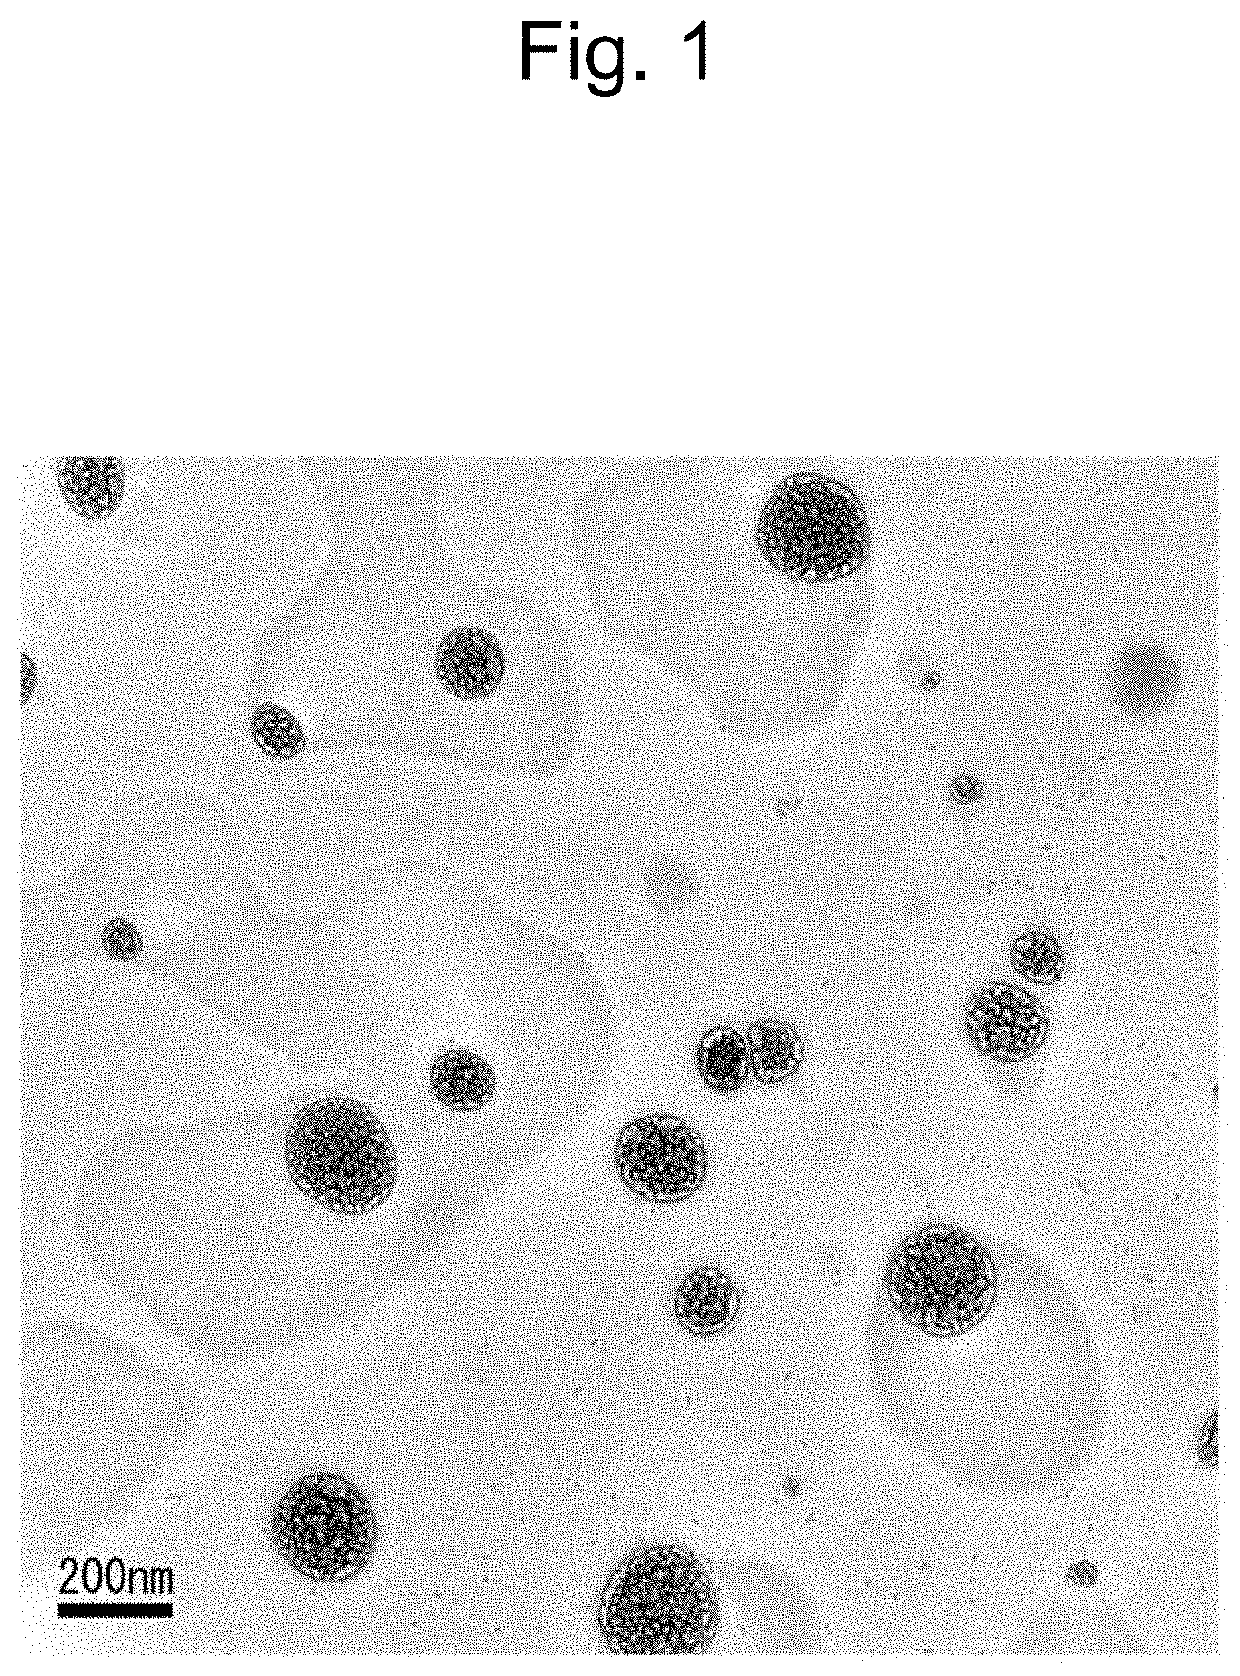 RGD and transferrin nanoparticle composition